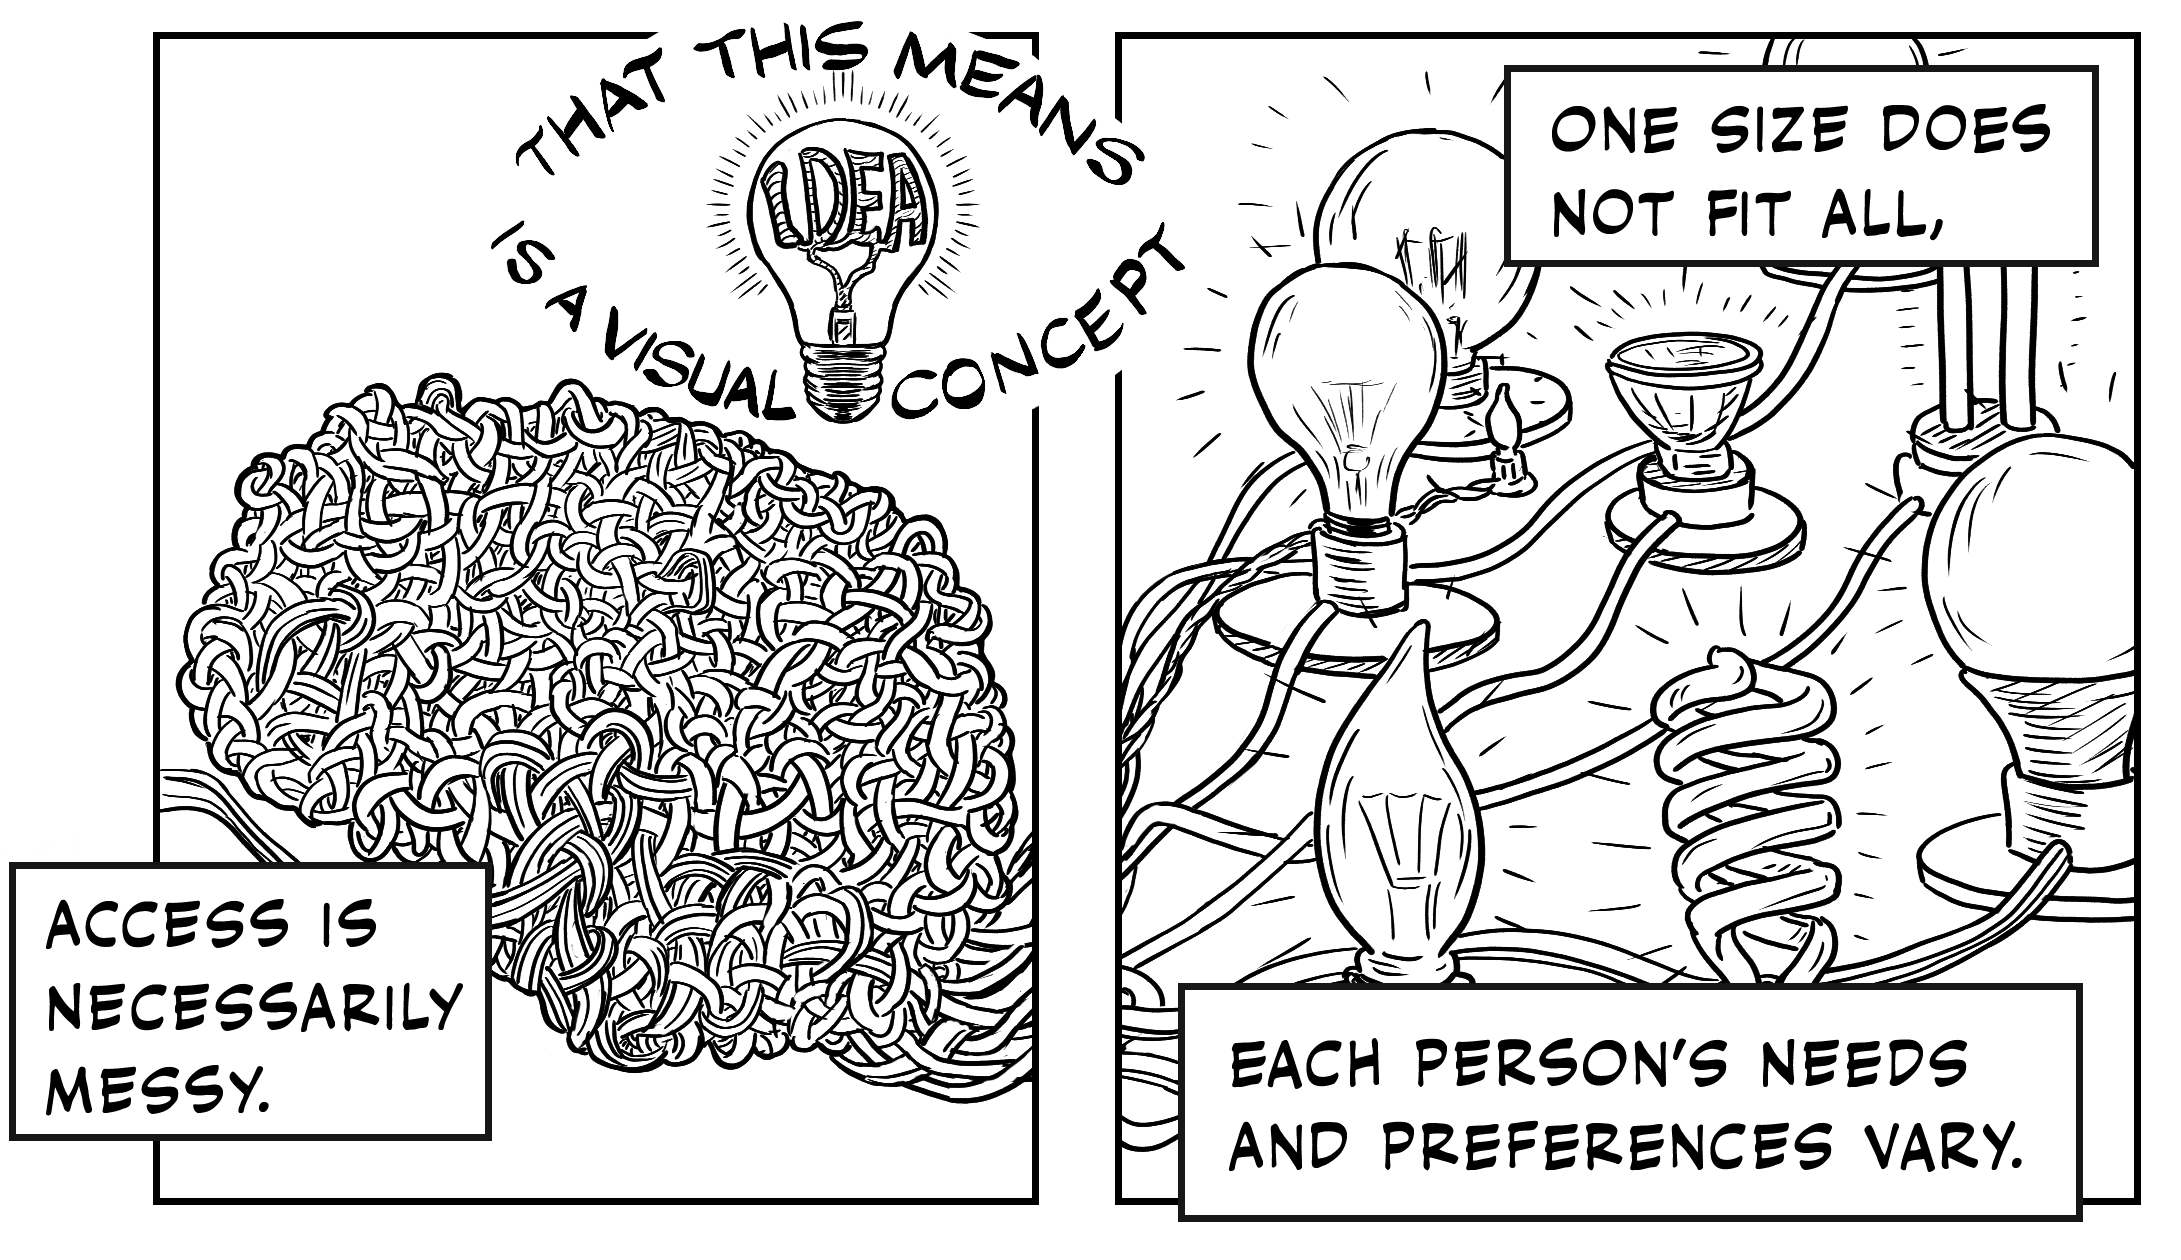 Panel 5: The muscle of the eye becomes a cord that enters into a densely tangled web of cords which form the shape of a human brain. Text reads “Access is necessarily messy.” Above, A lightbulb with text curving around the top and bottom creates the shape of an eye’s outline, the lightbulb as pupil and the word “idea” formed in the bulb’s glowing filament. Text reads: “That this means idea is a visual concept.” Panel 6: The untangled cords escape the brain and lead into the next panel, each connecting to power up nine different light bulbs, varying in shape and size. Text reads: “One size does not fit all, each person’s needs and preferences vary.”